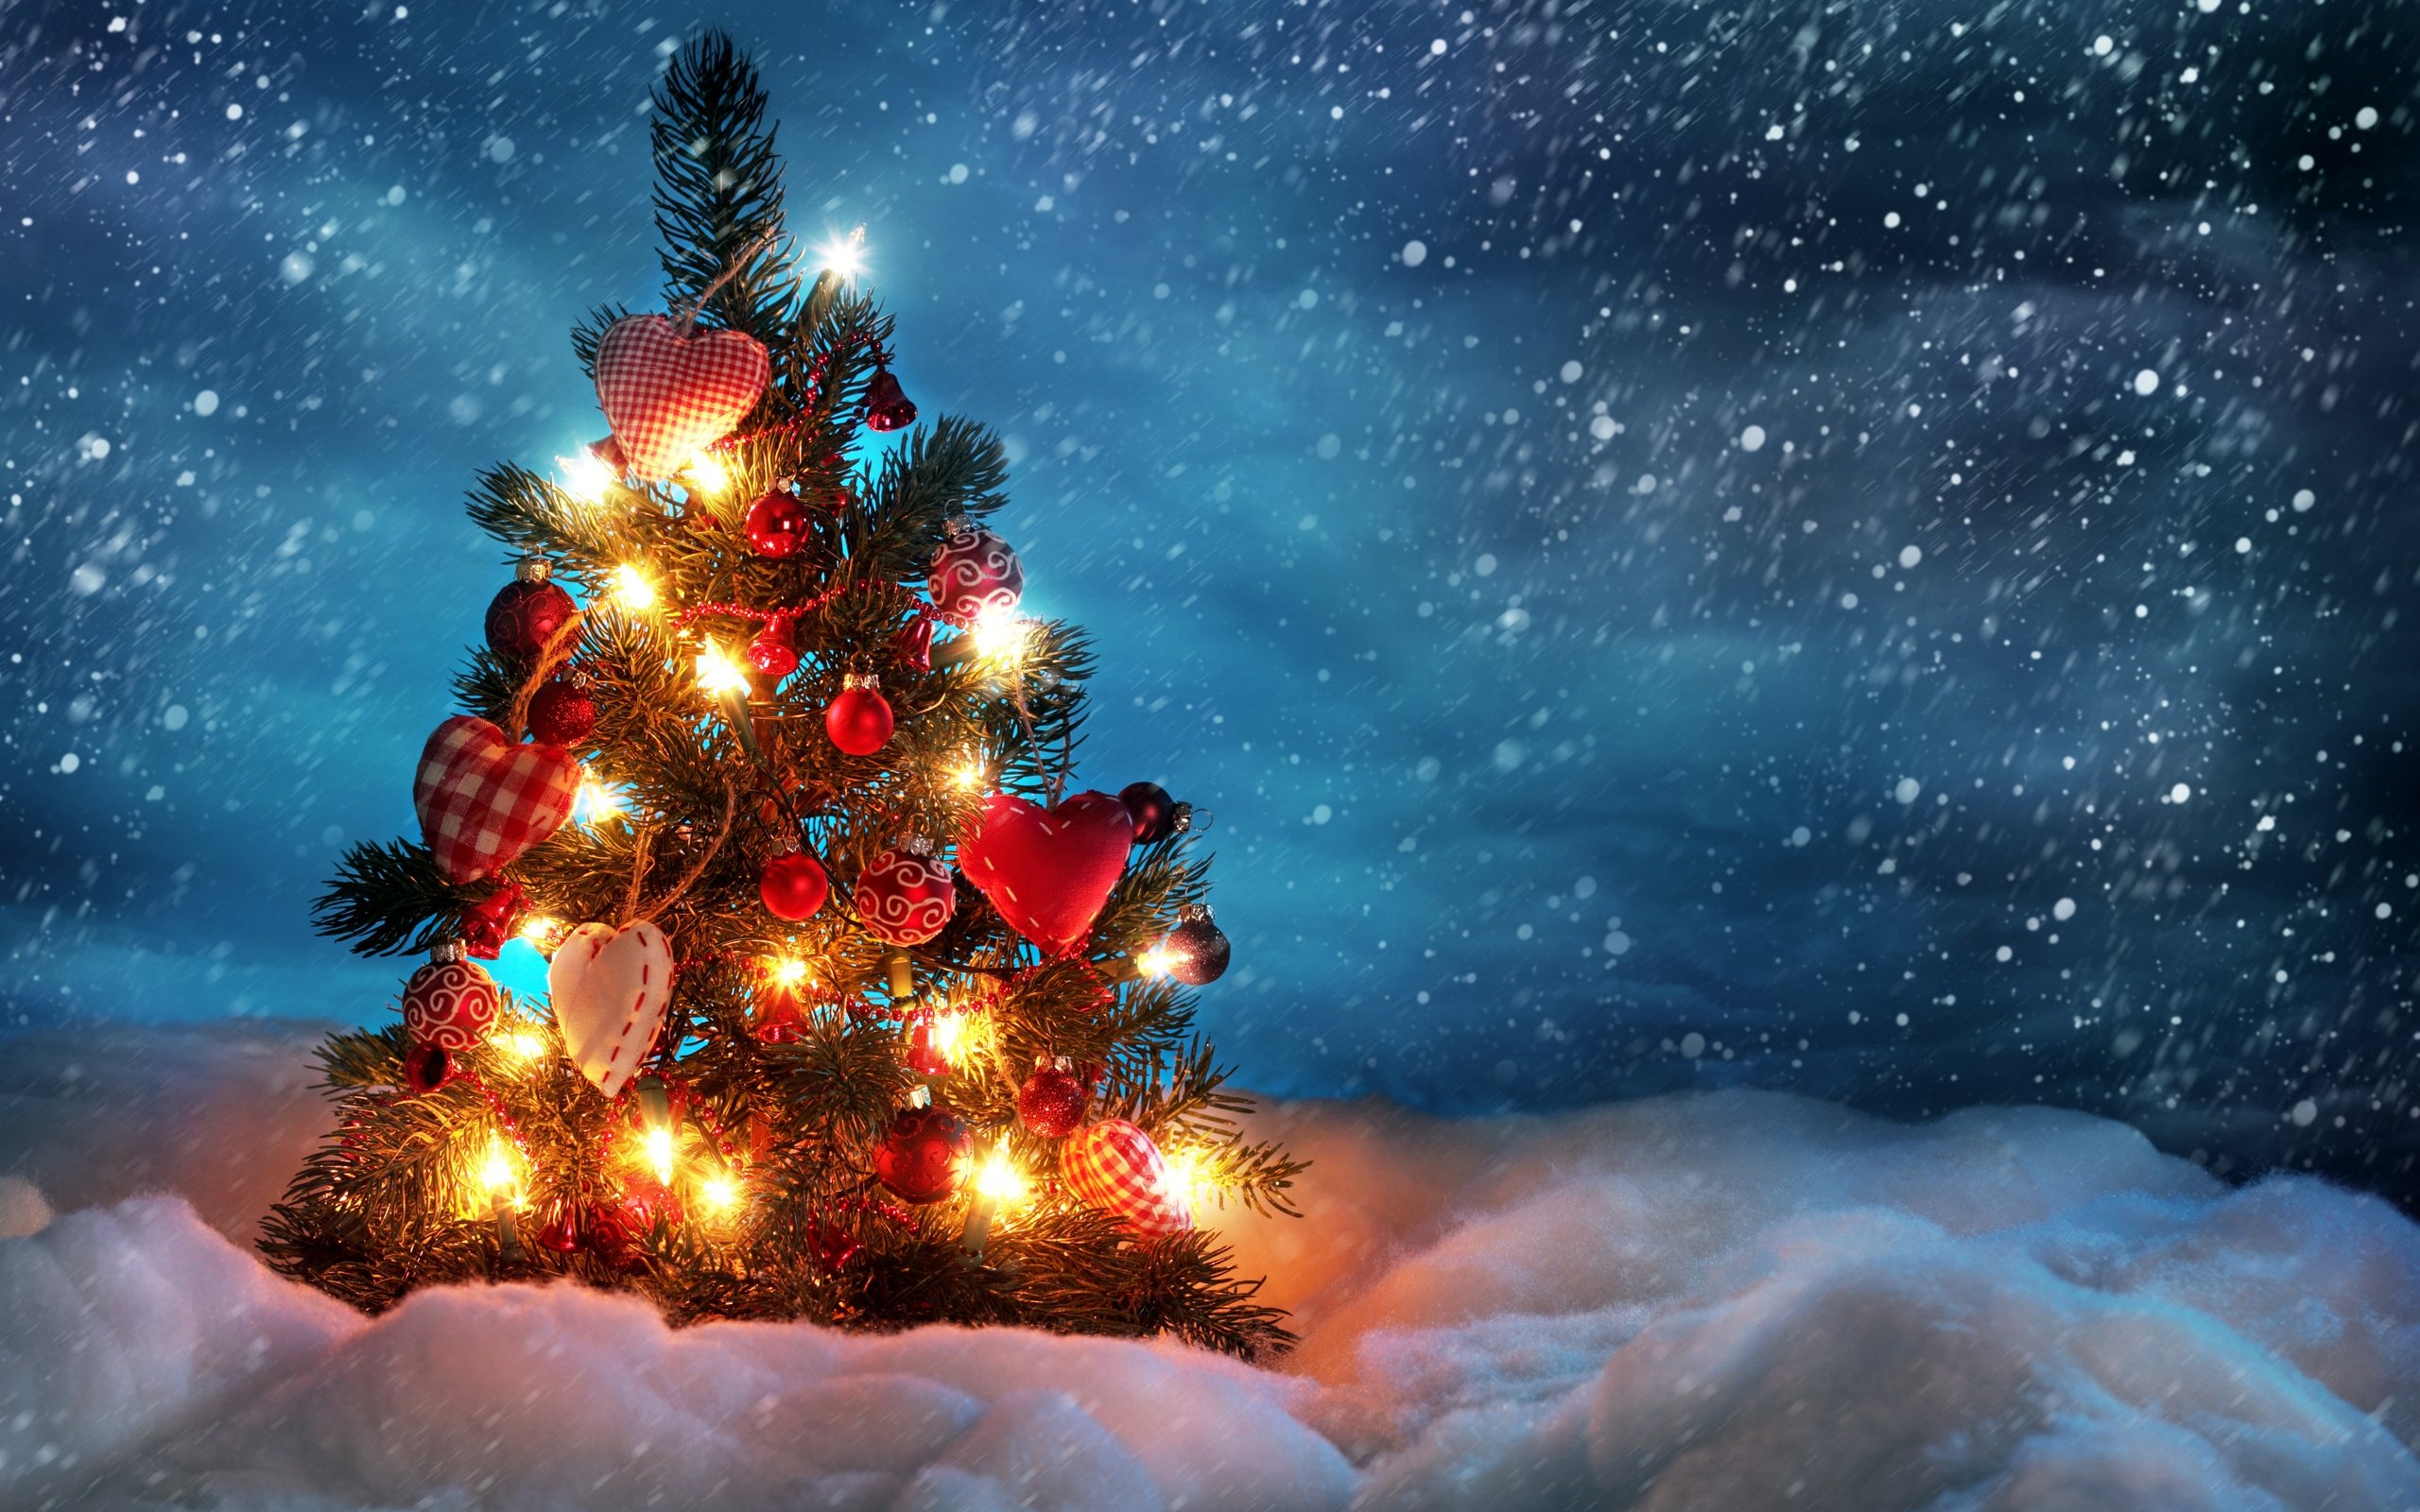 Essential Christmas Desktop Wallpapers for 2013 2560x1600